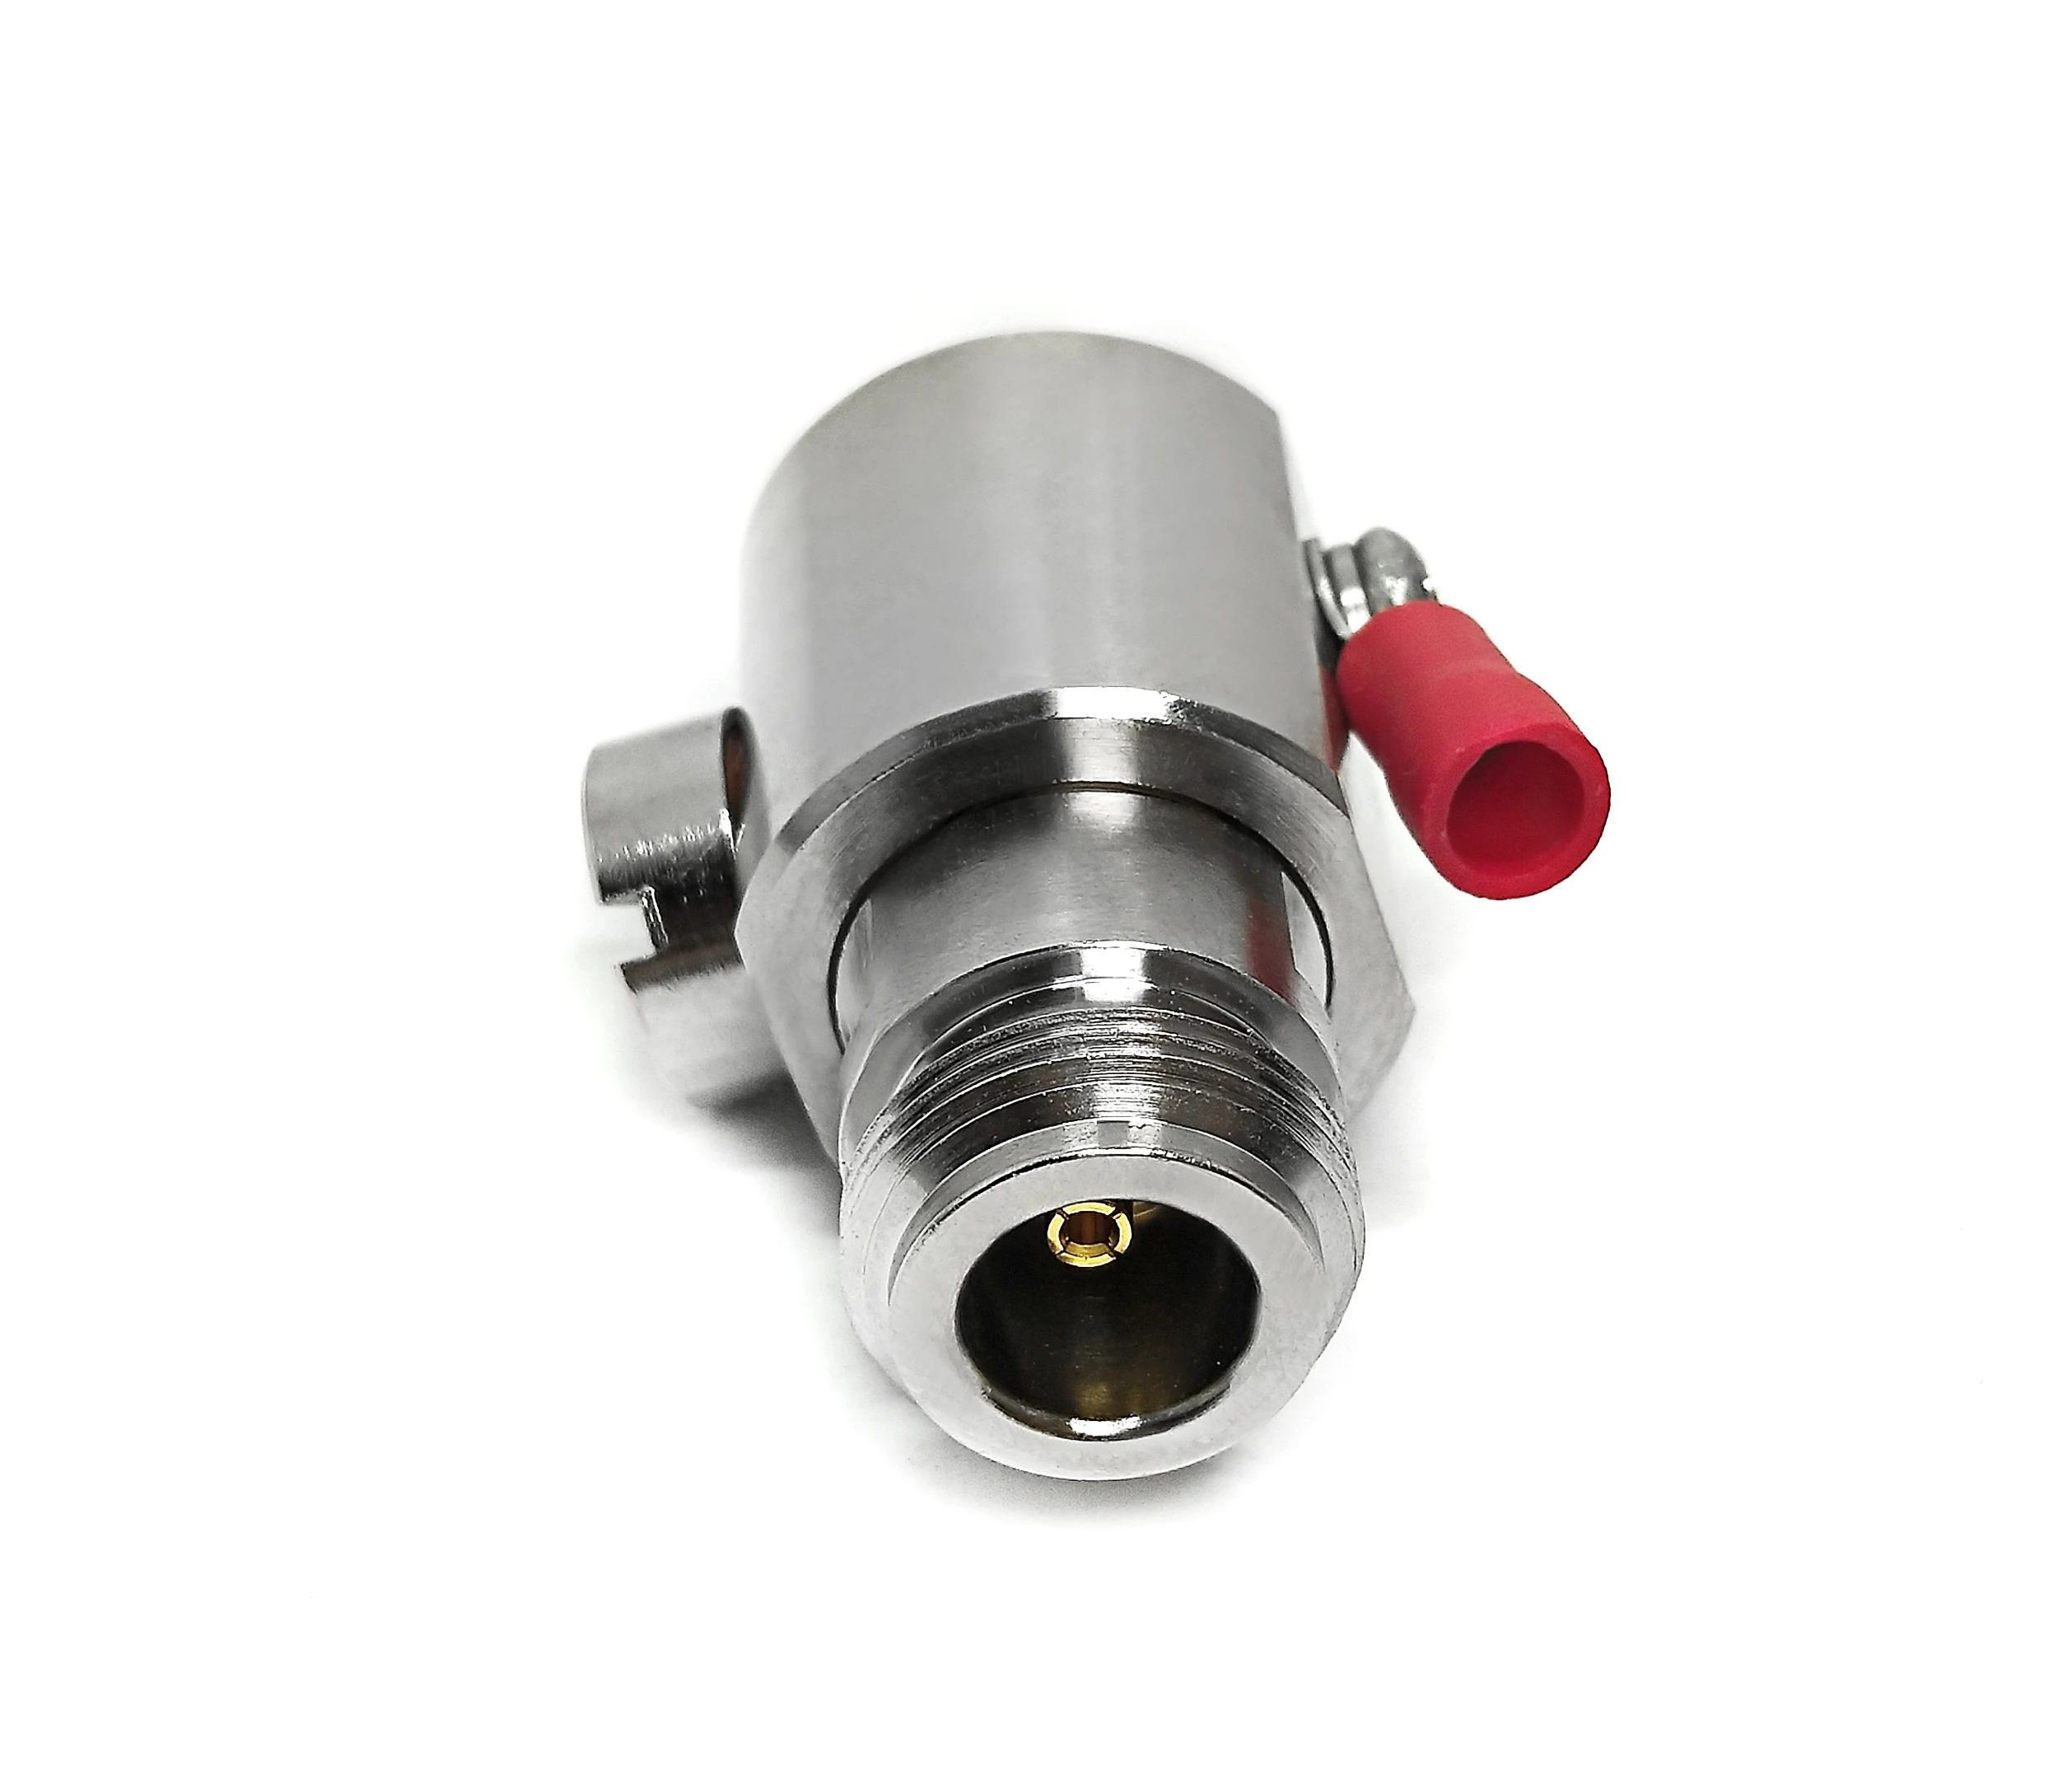 Free sample LOW MOQ (DC-3ghz ) 230V CCTV Gas discharge tube BNC male female Coaxial Connector lightning surge arrester protector details